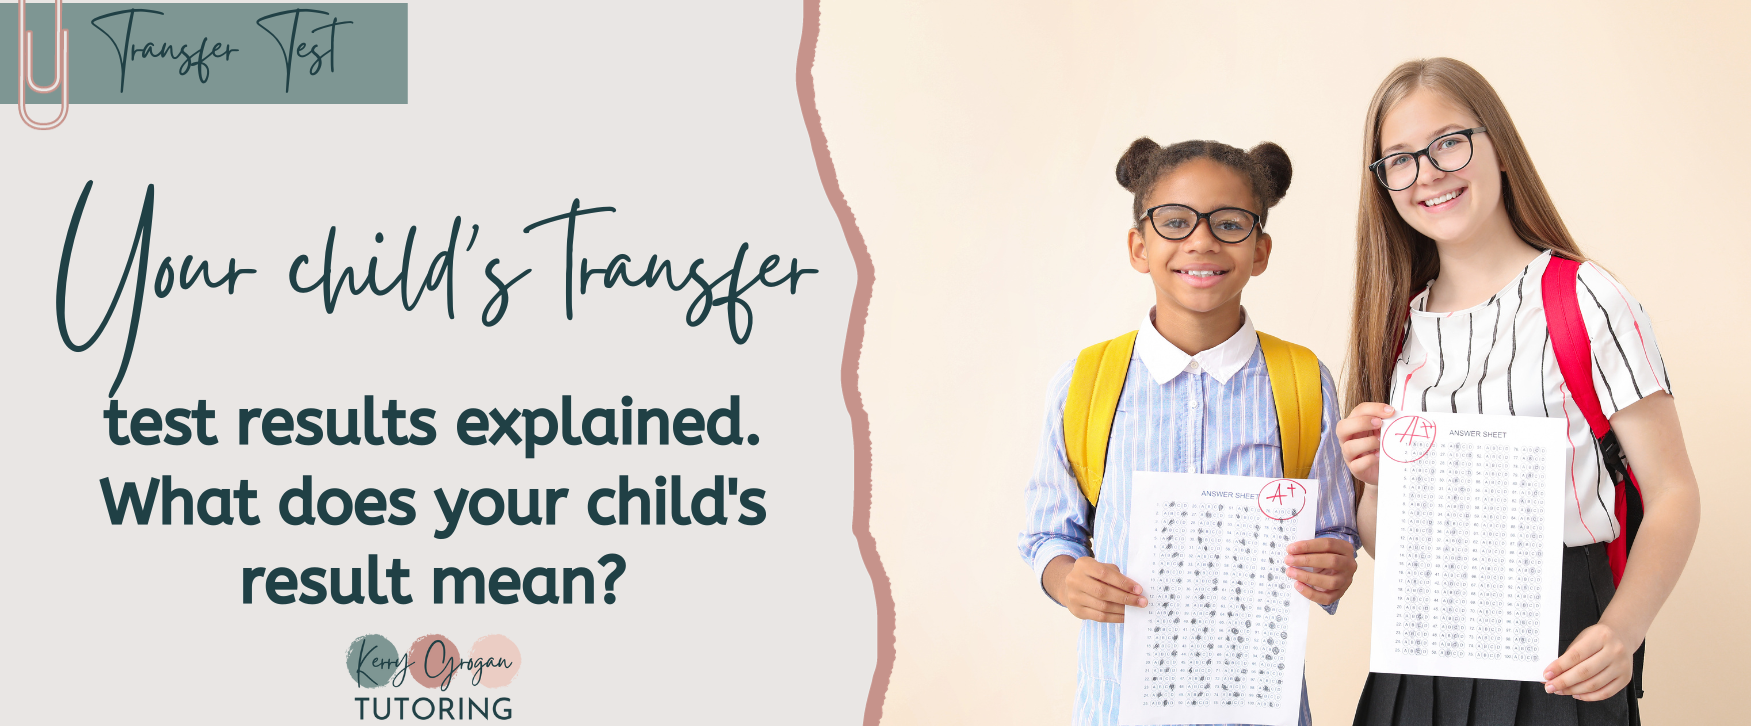 Your child's transfer test results explained. What does your child's result mean